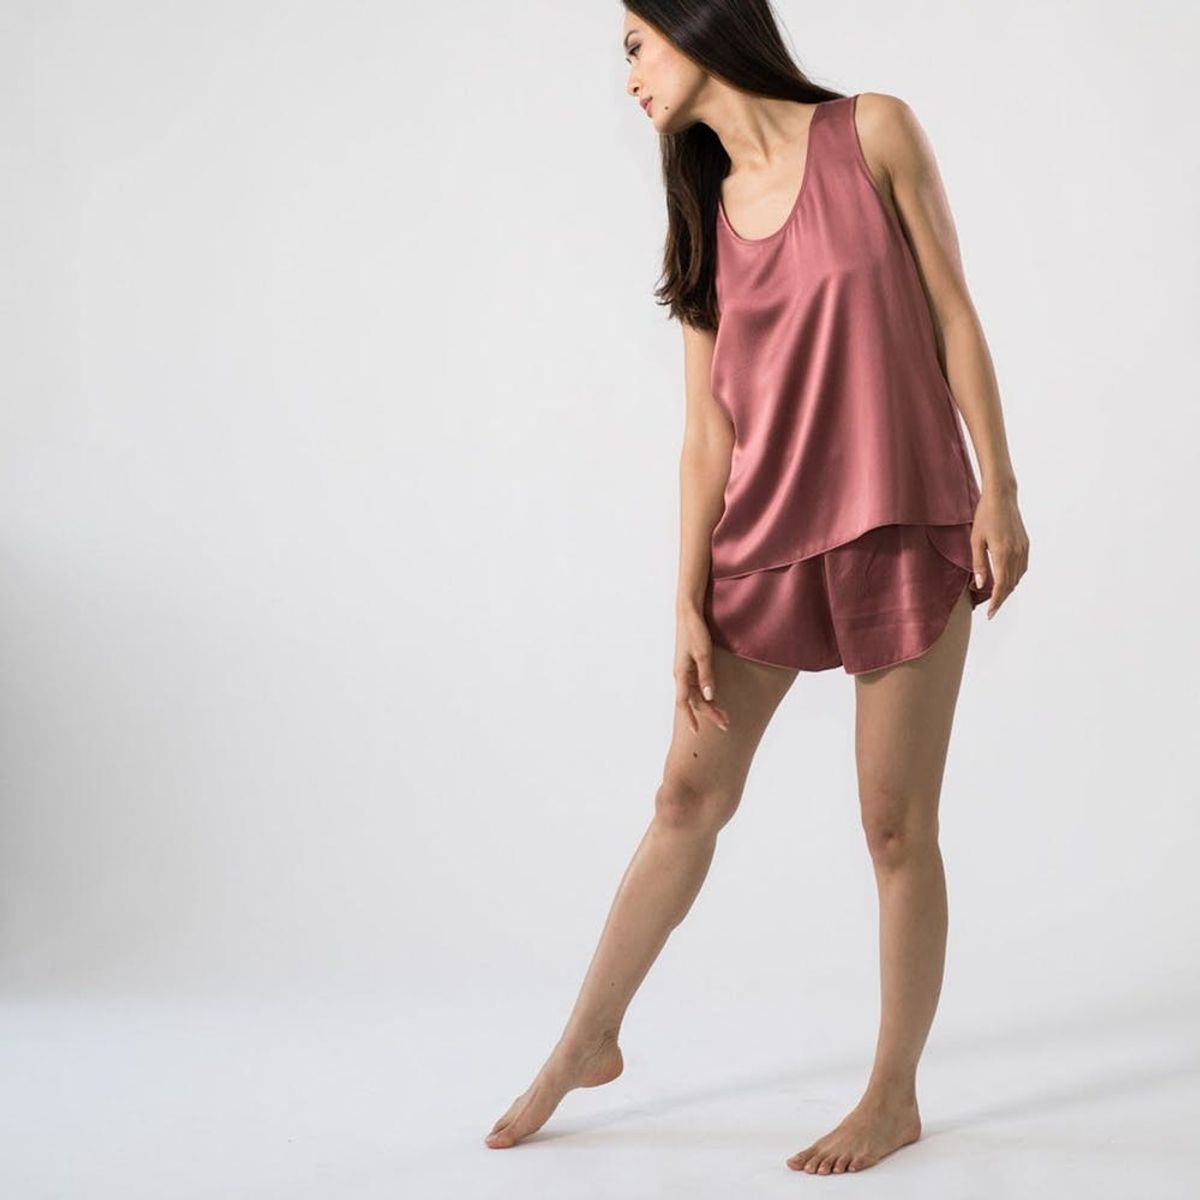 You Can Finally Look Good in Bed, Thanks to This Sleepwear Brand